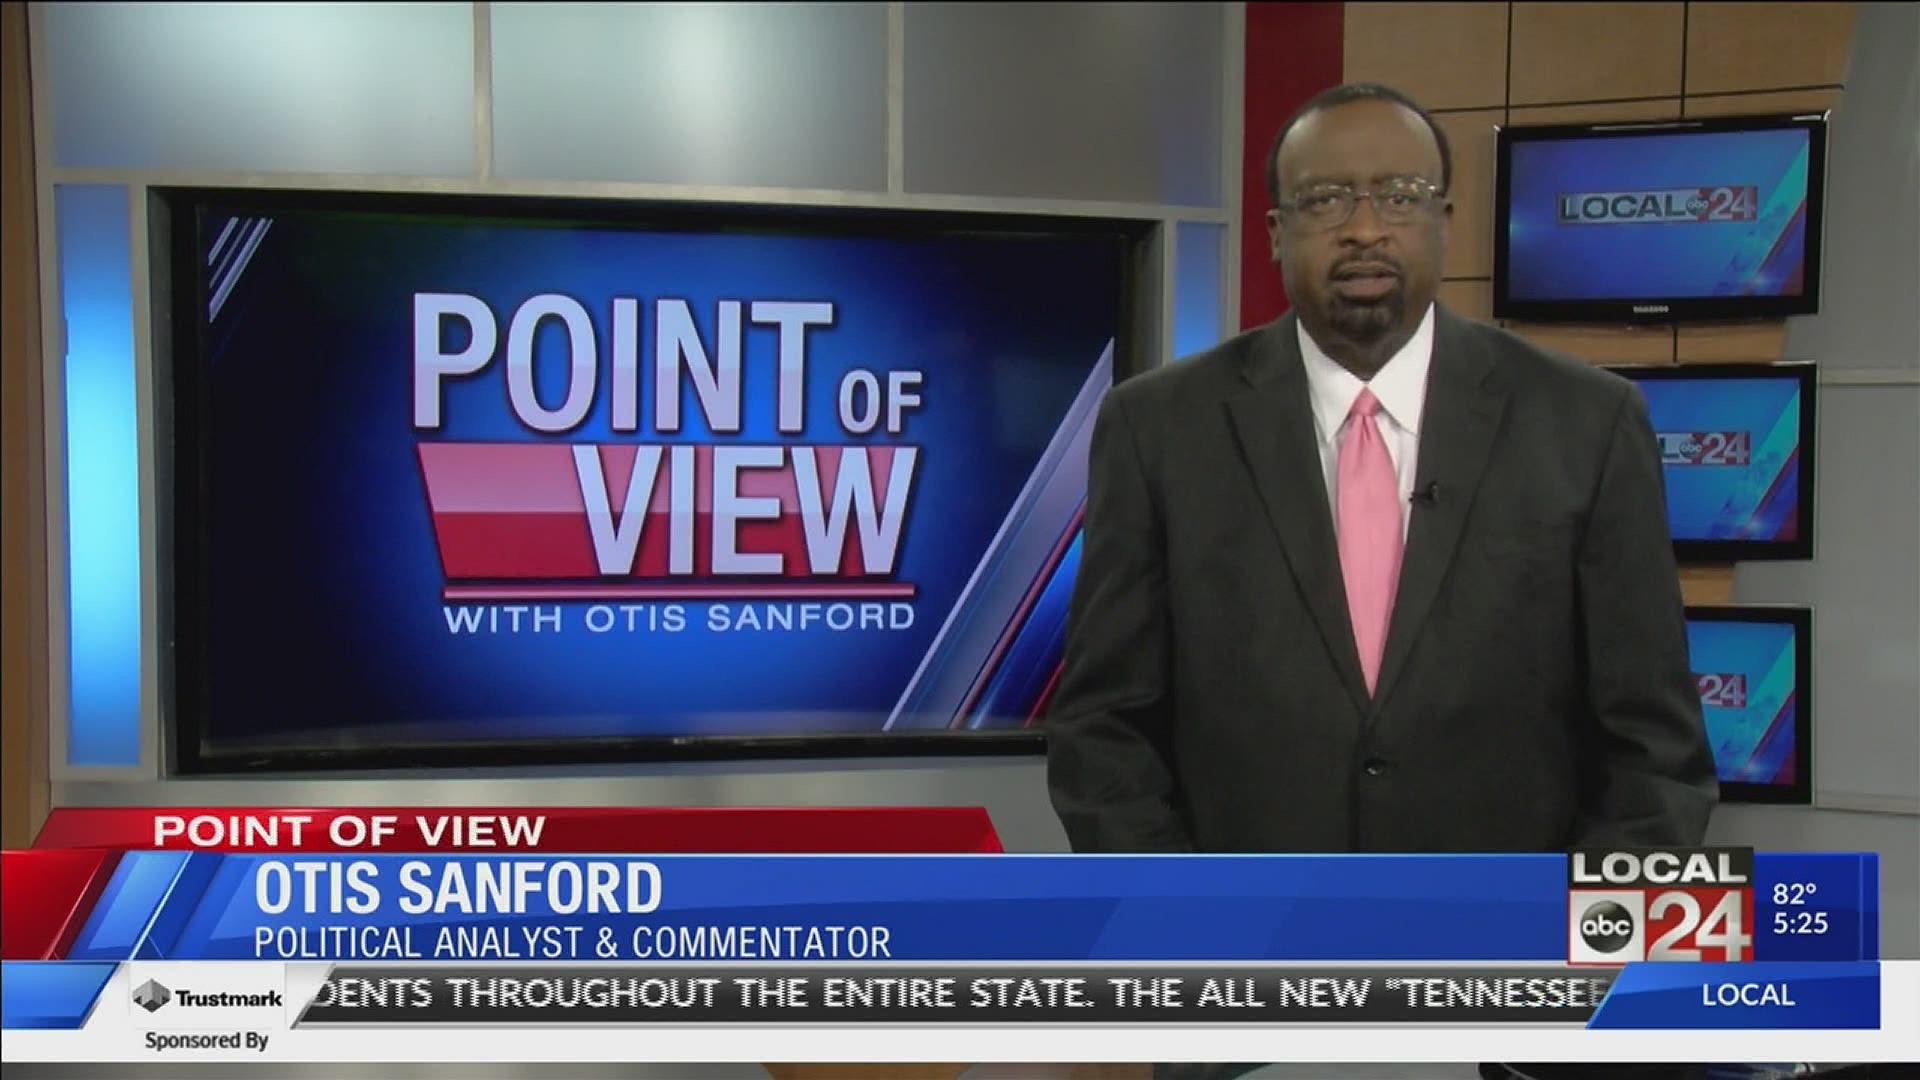 Local 24 News political analyst and commentator Otis Sanford shares his point of view on death row inmate Pervis Payne’s case.